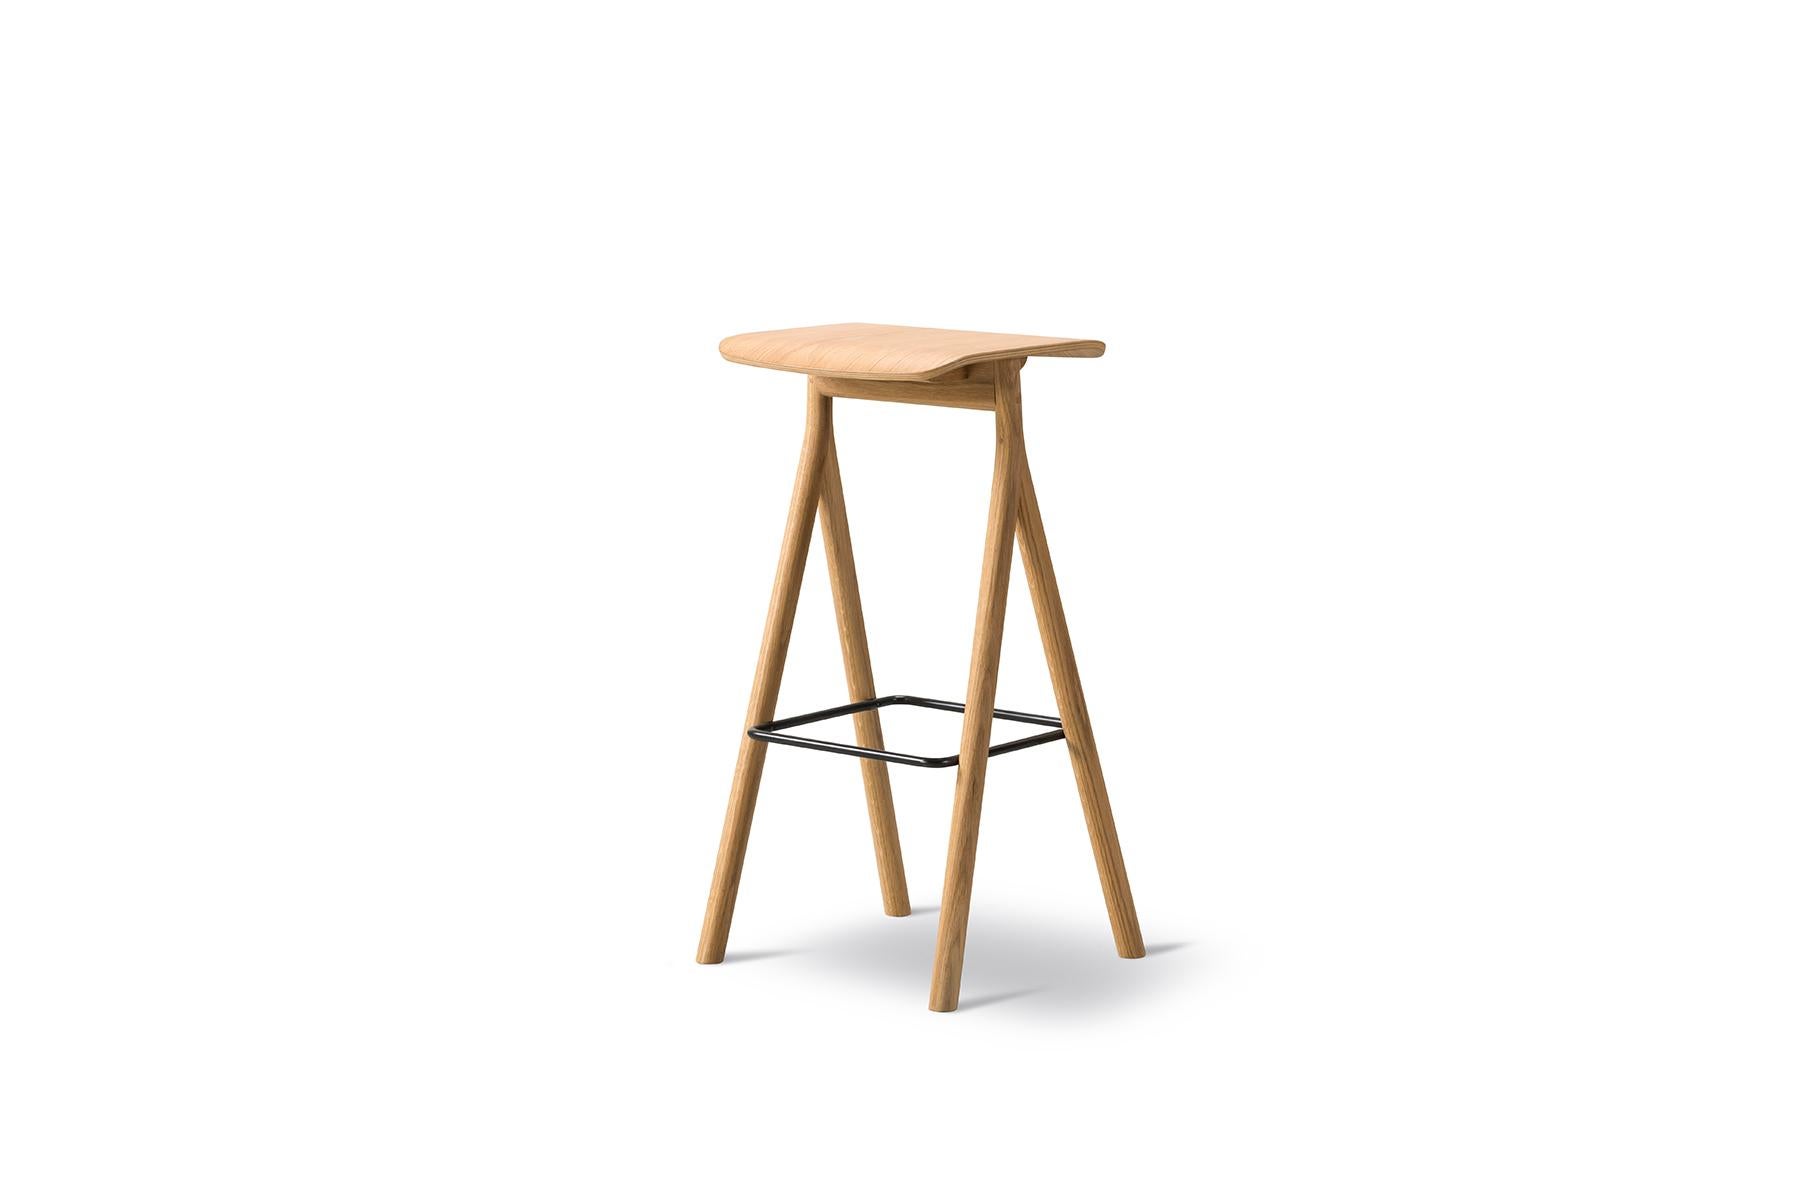 The Thau + Kallio Yksi barstool stands strong yet appears light with its signature Y-shaped legs positioned upside-down. Crafted from solid oak and available in lacquered or black lacquered oak, the impression is minimal with maximum attention to